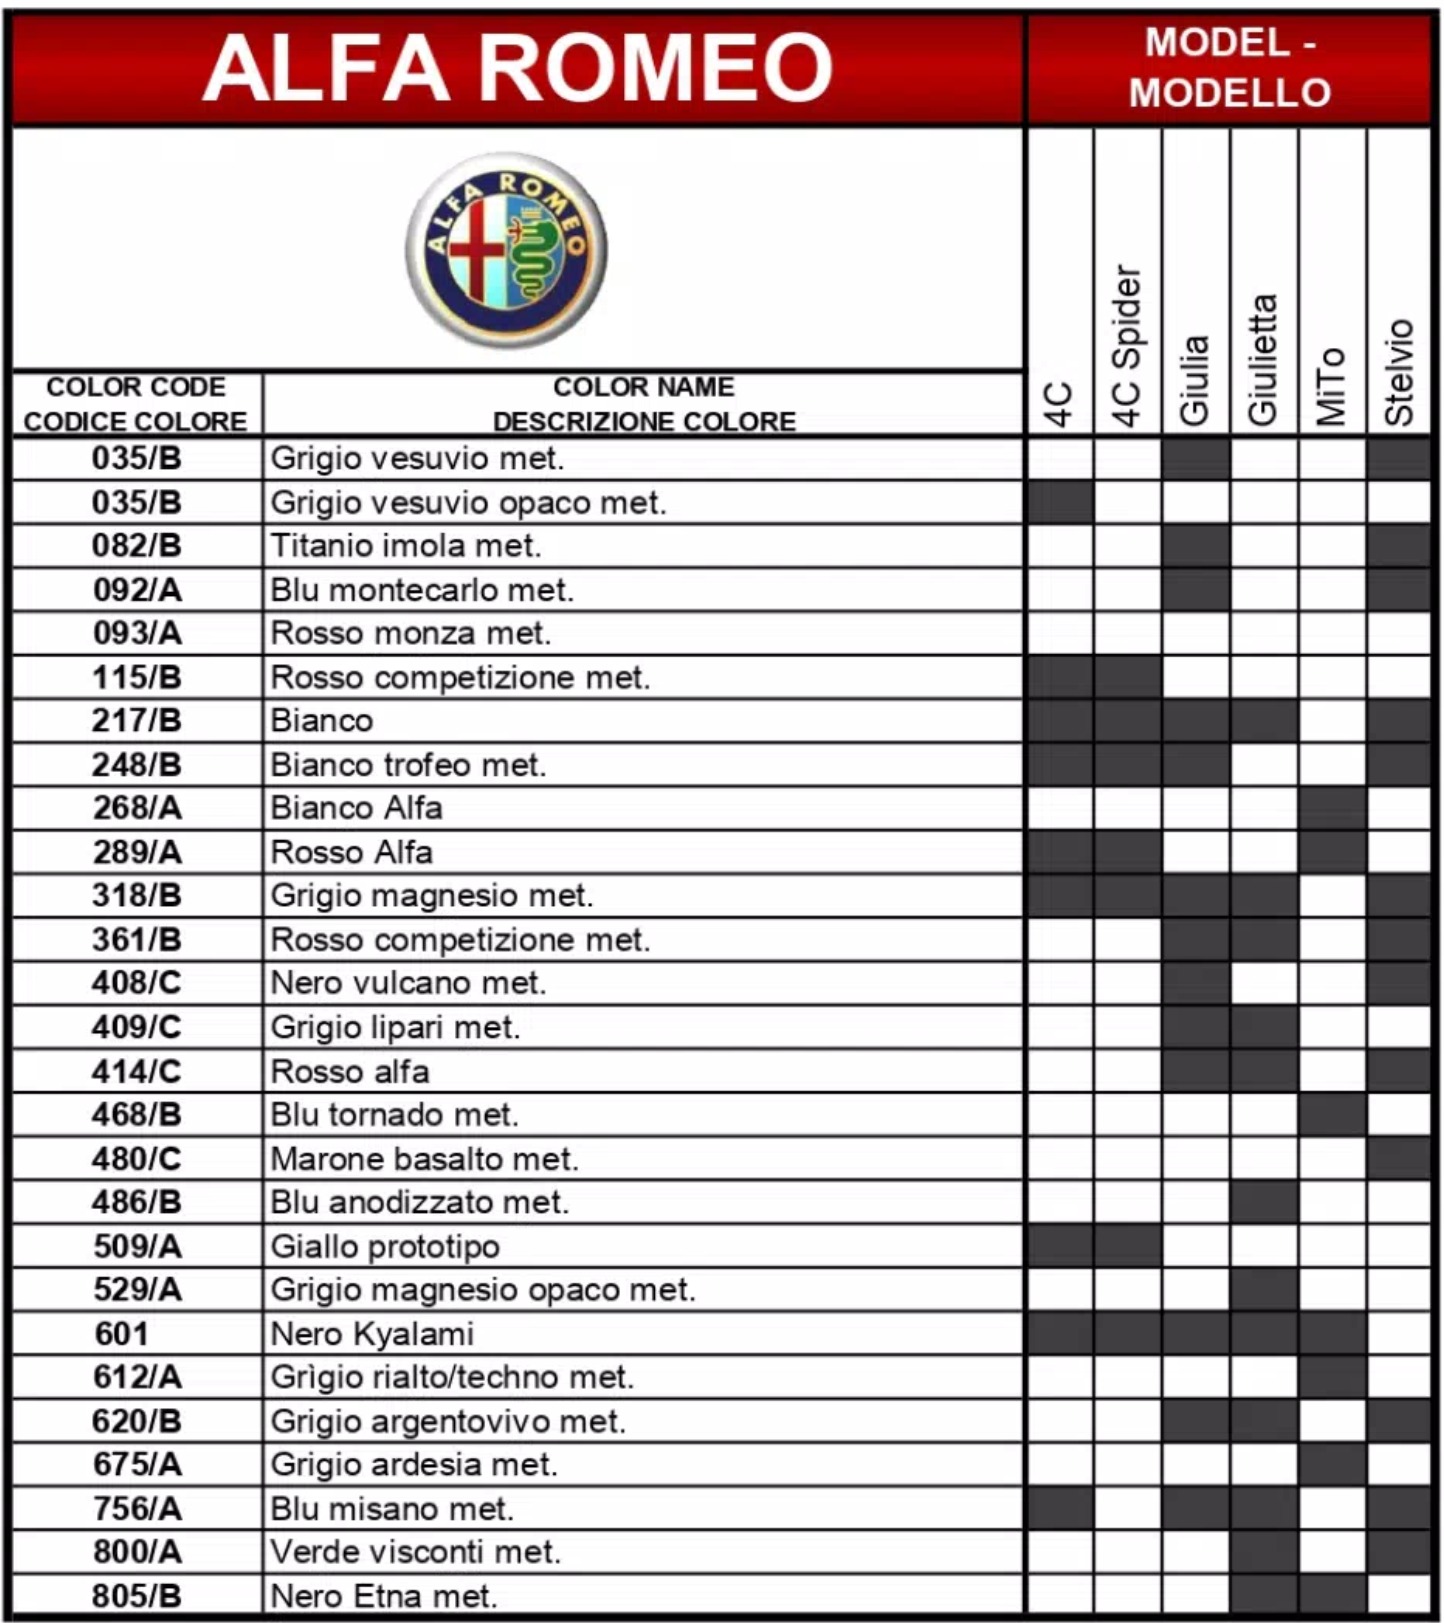 An excel sheet with the Alfa Romeo logo. Dark colored shades show what color code goes to what car for the year